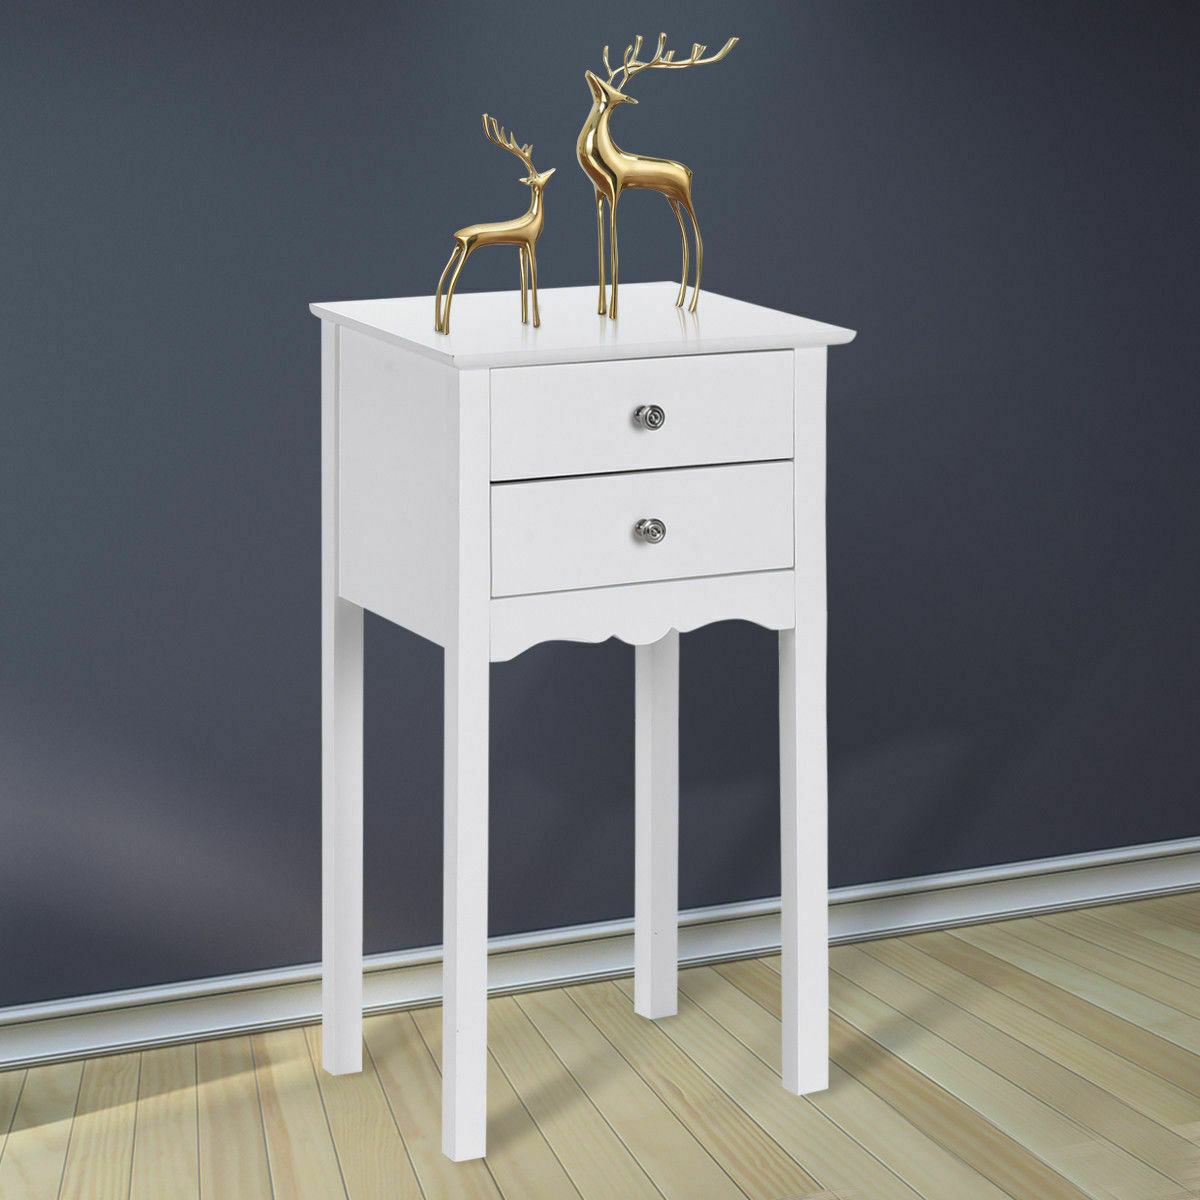 Side Table Night Stand End Accent Table W/ 2 Drawers Furniture White